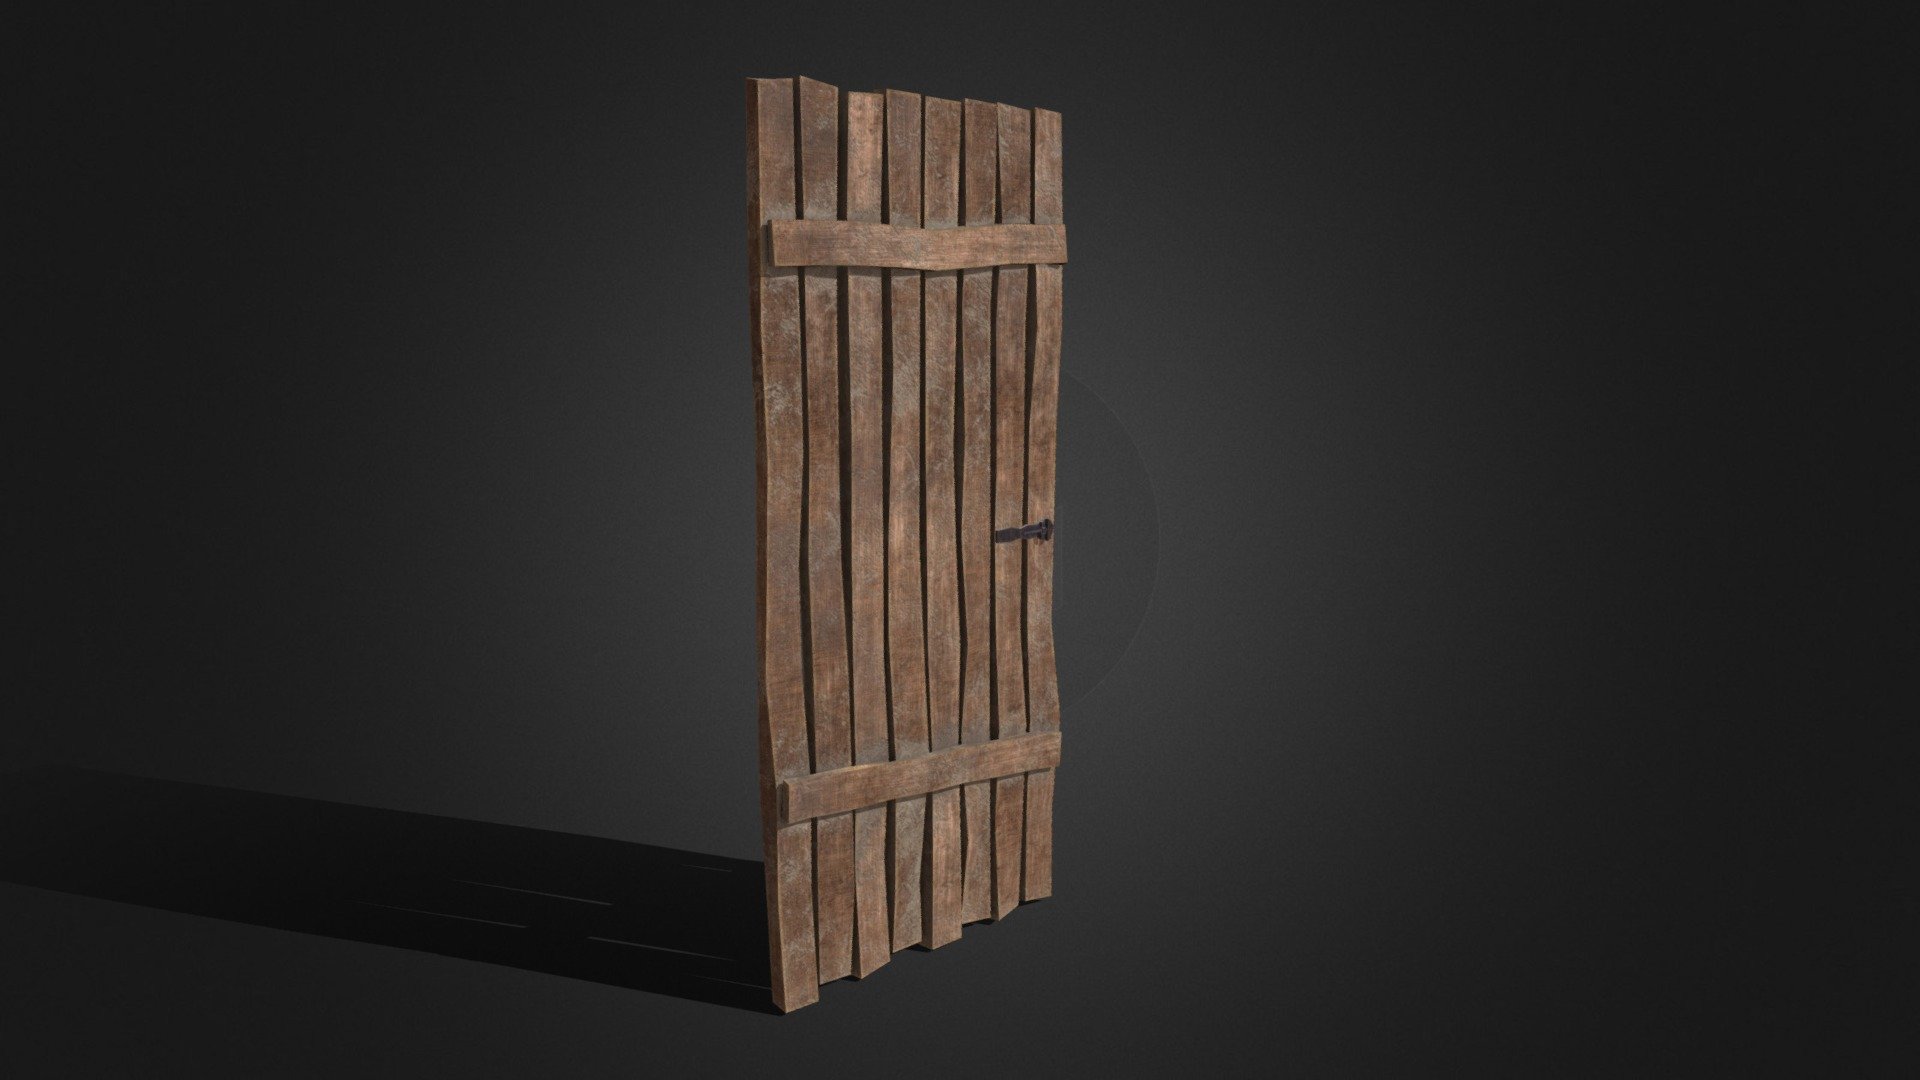 Old Wooden Door
Low Poly
444 Polygons 480 Vertices
Game Ready
You can use the door model in your medieval themed designs, in your house, castle and barn models.
Created with 3ds max.
Hand painted with substance painter 3d model